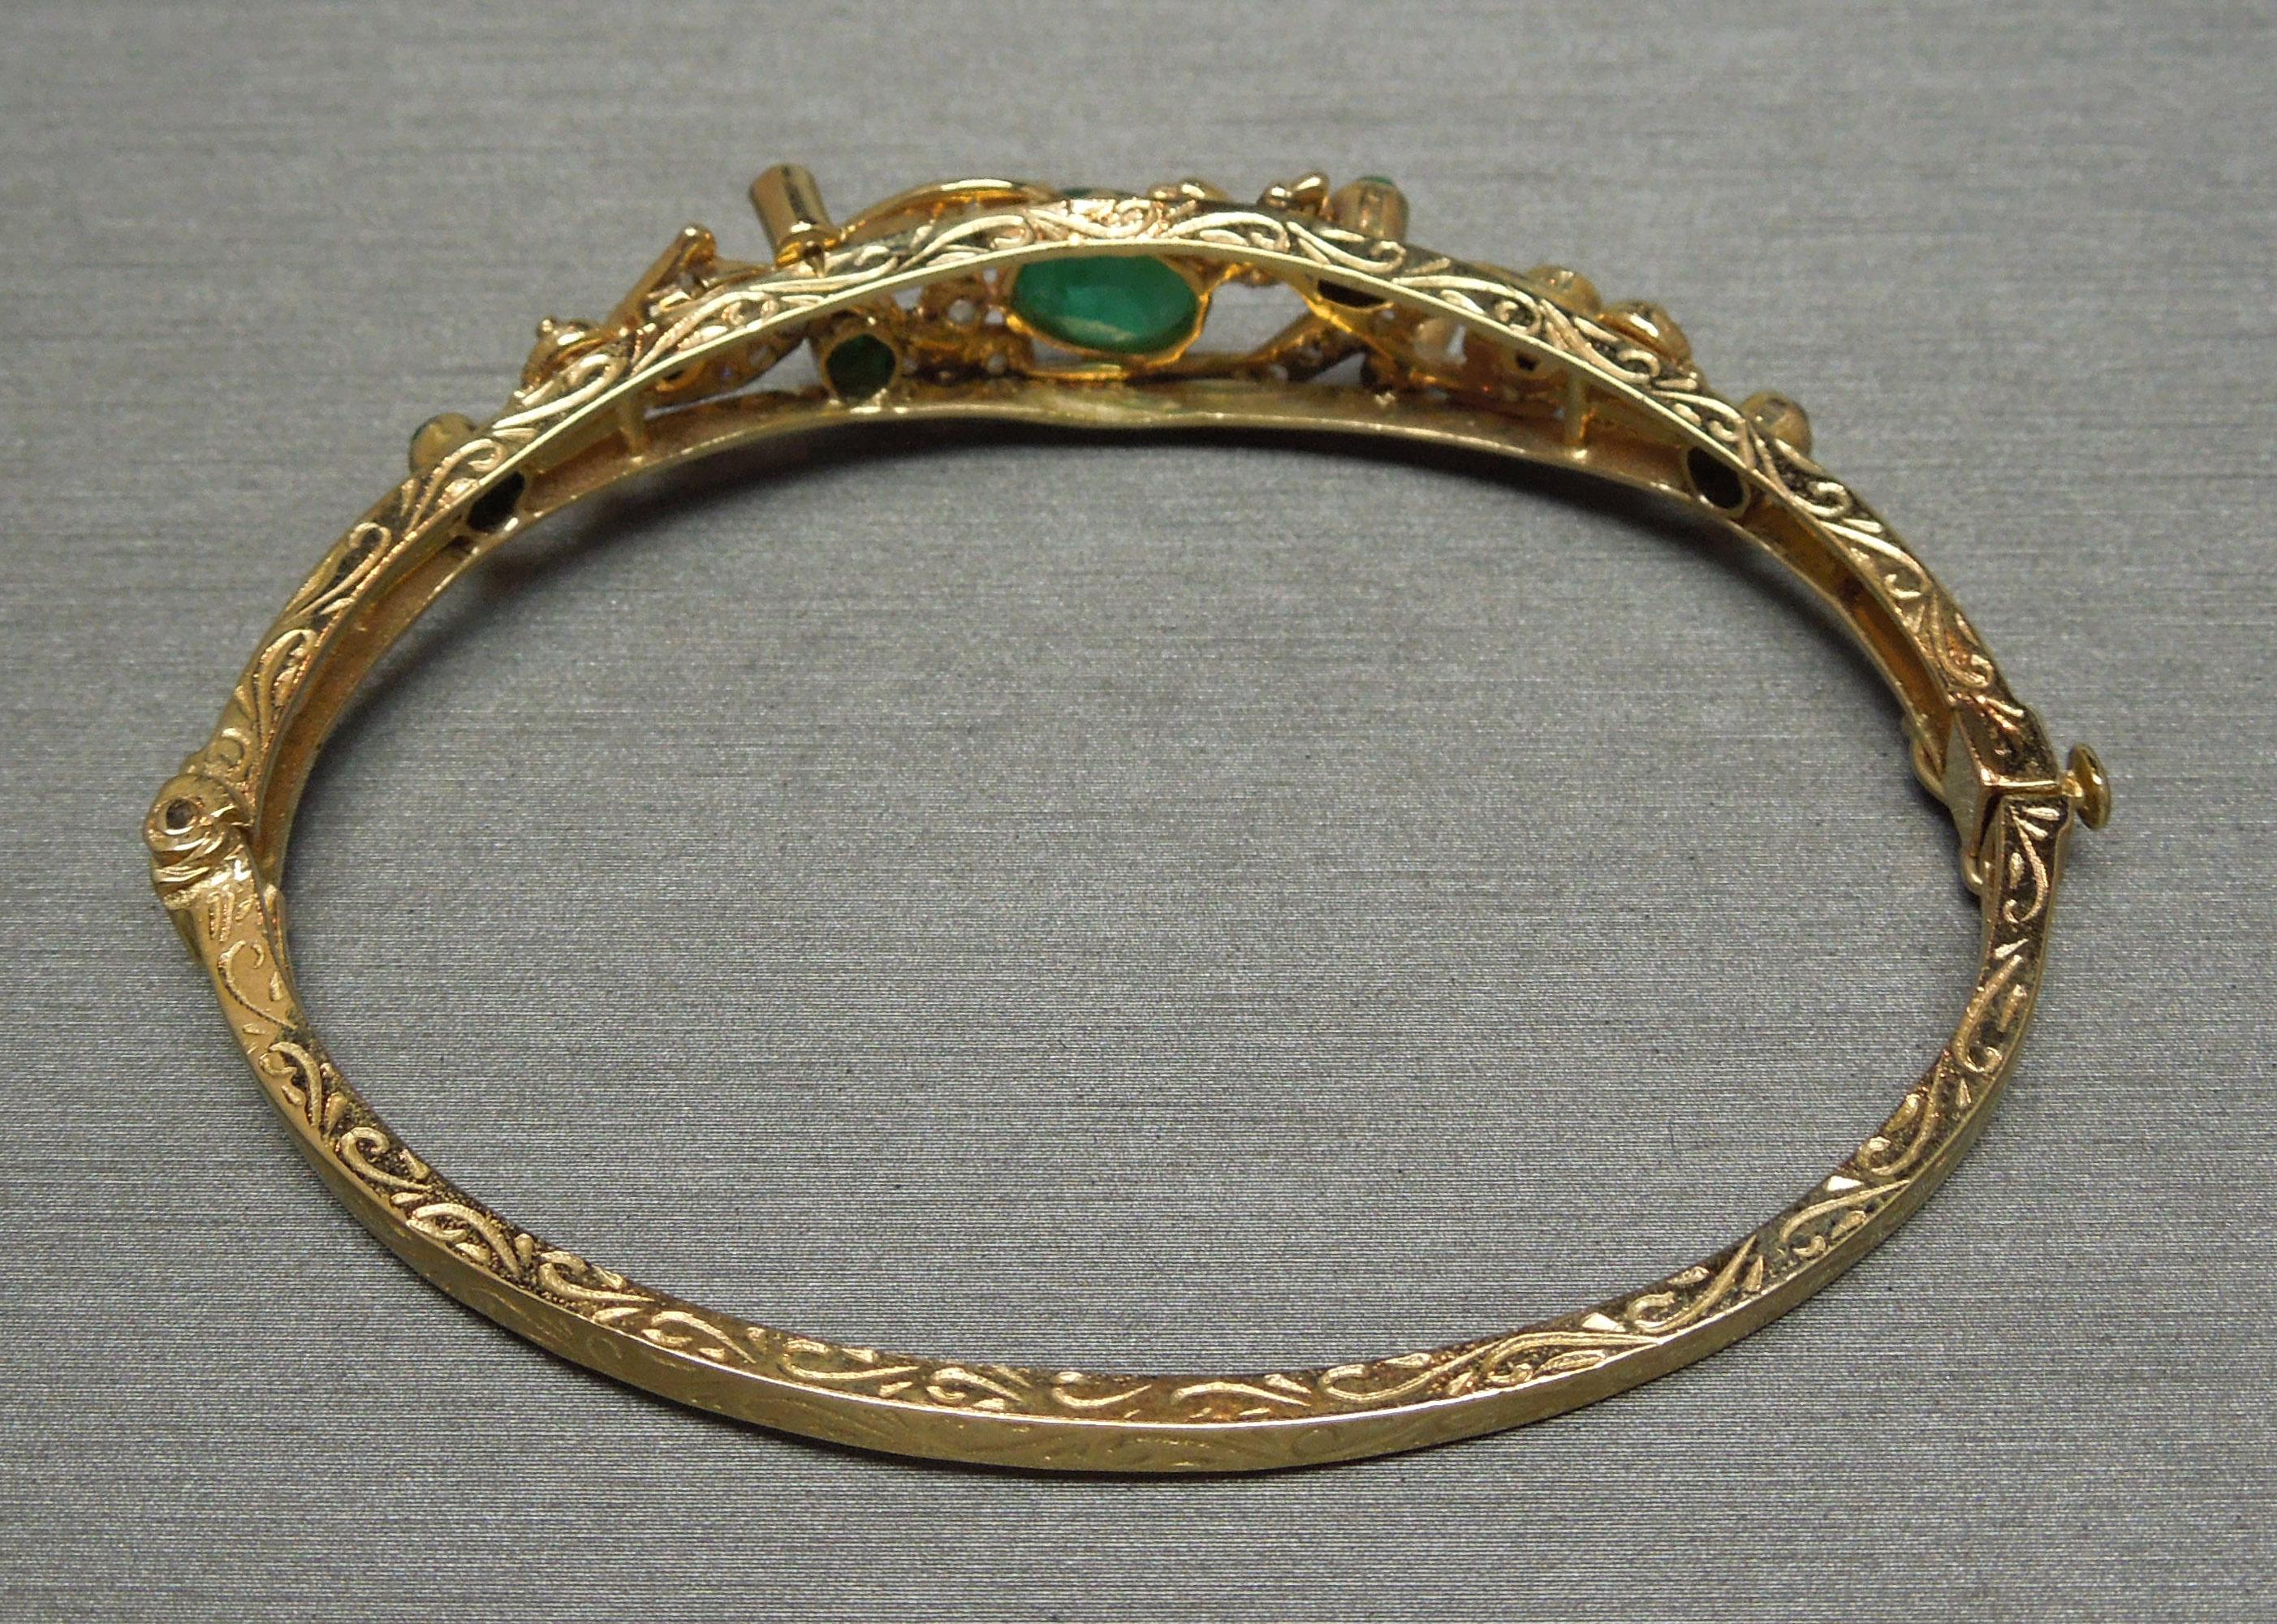 This 14 Karat Yellow Gold Filigree Emerald & Diamond Bangle Bracelet borders between Edwardian inspirations with a slight Art Deco flare. In an Oval shaped bangle for comfort as well as to keep the jeweled section centered on the wrist, as opposed